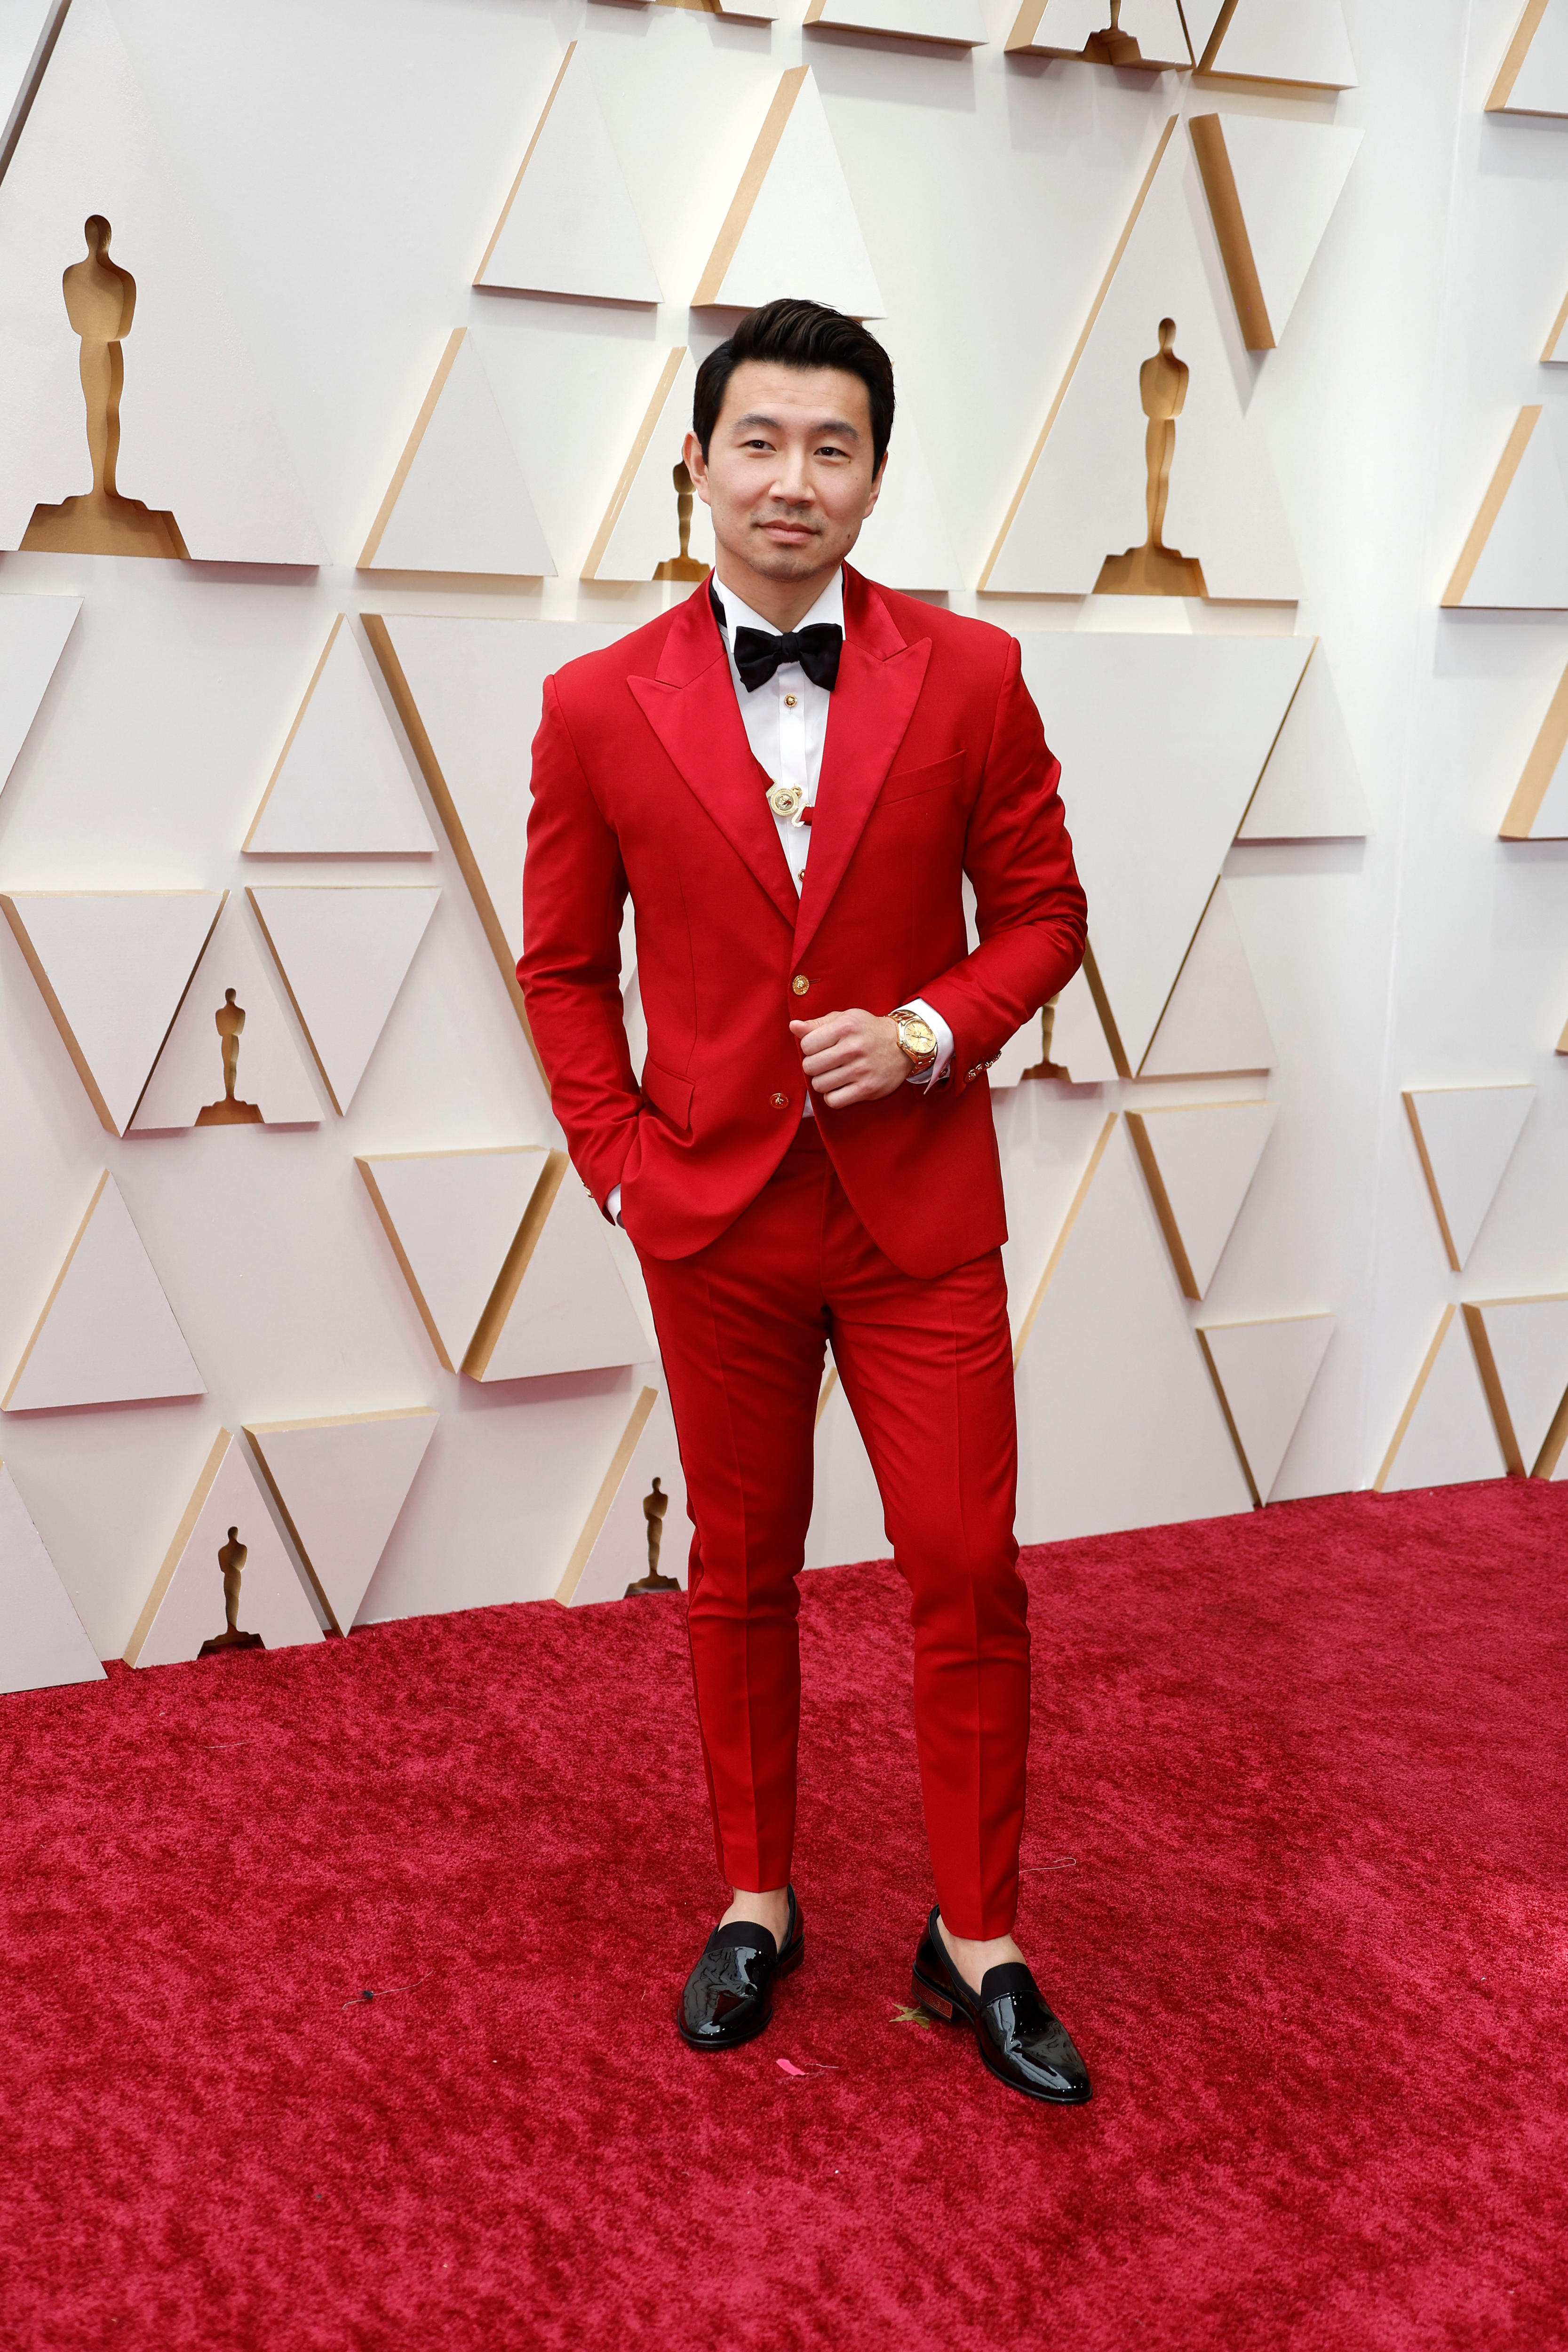 A man wearing a red suit and black loafers stands on a red carpet in front of a white media wall for the Oscars.